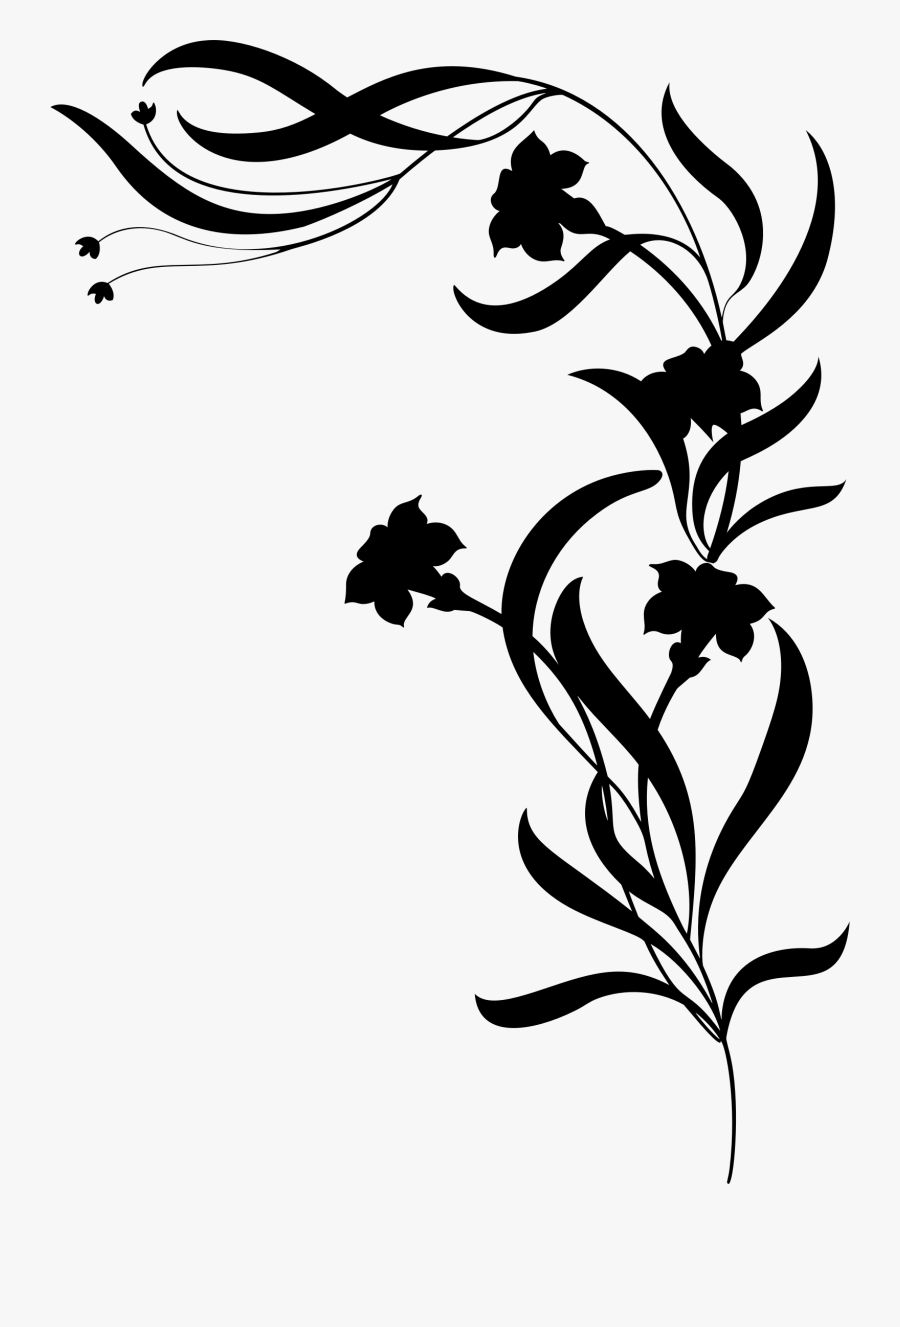 Flower Silhouette Clipart - Flower Png Black And White, Transparent Clipart